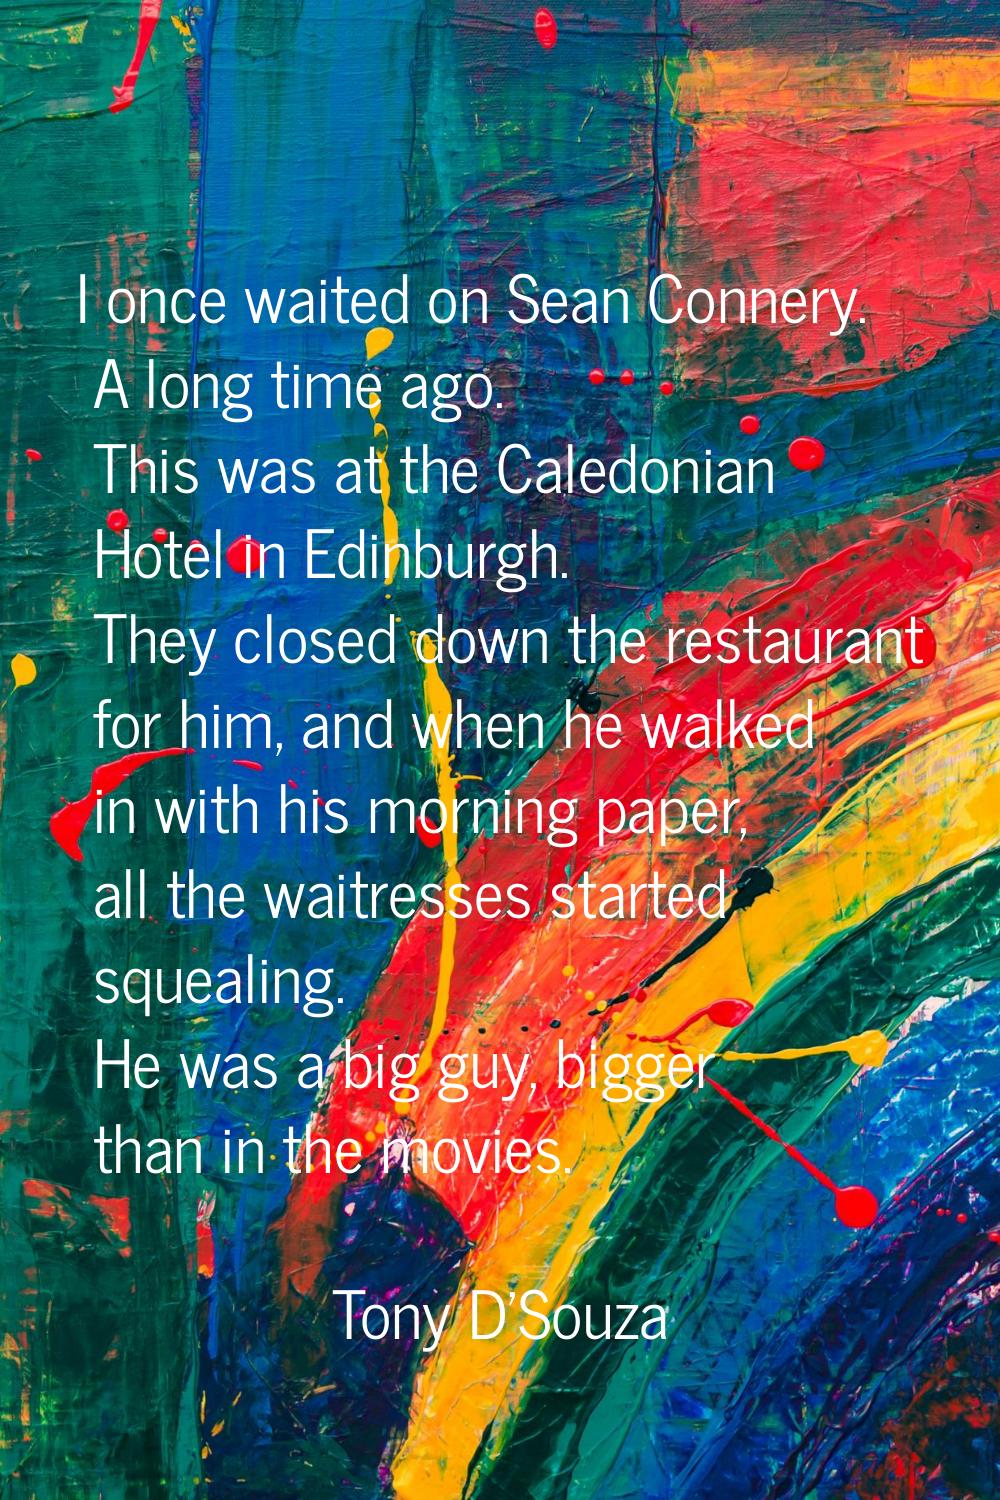 I once waited on Sean Connery. A long time ago. This was at the Caledonian Hotel in Edinburgh. They